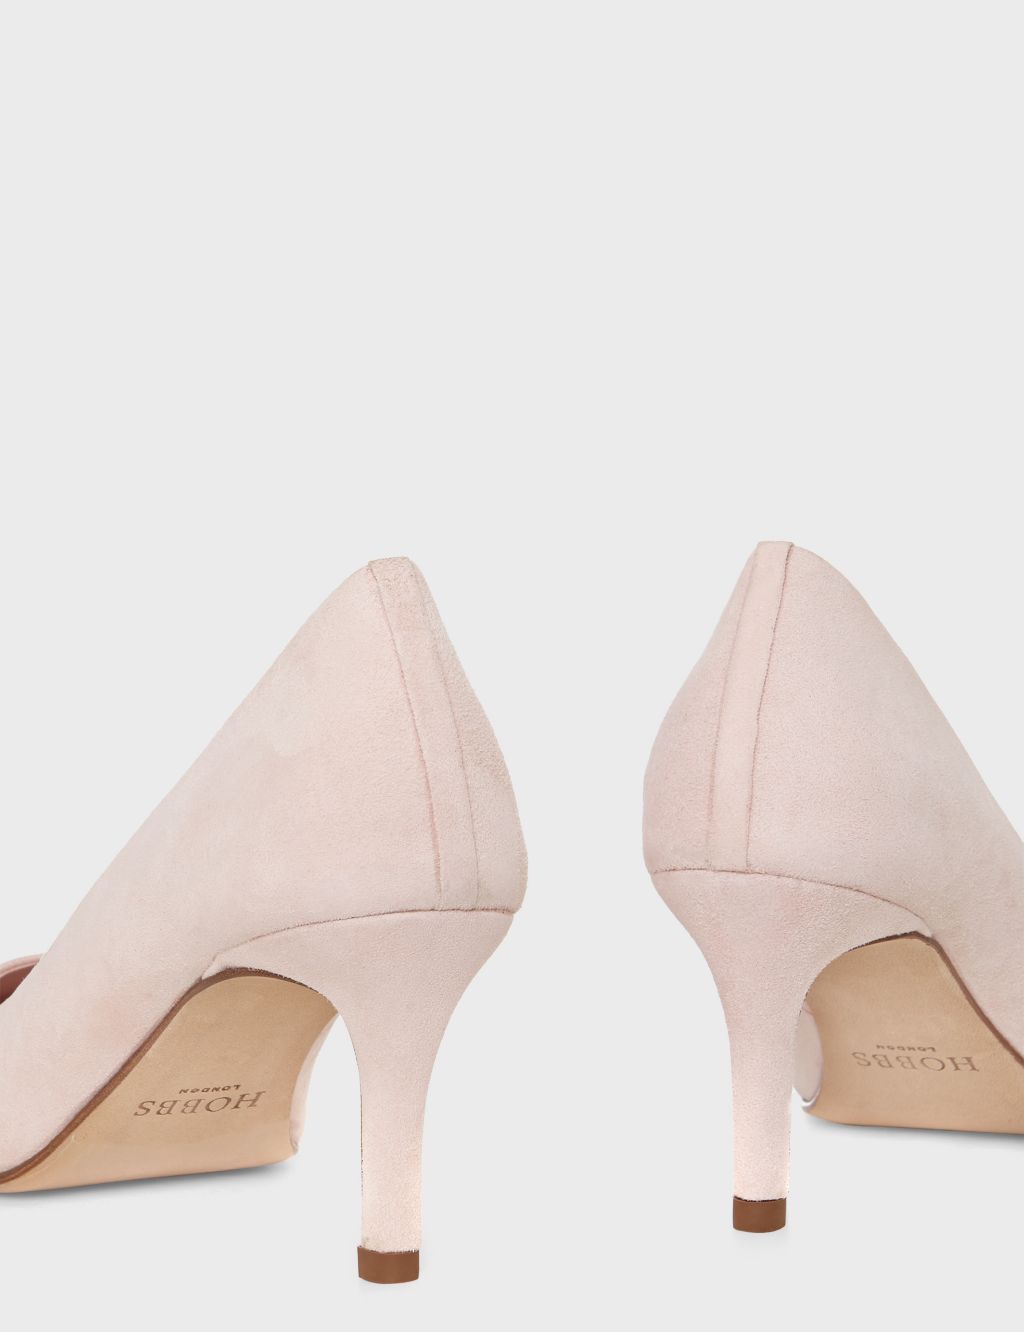 Suede Kitten Heel Pointed Court Shoes image 4